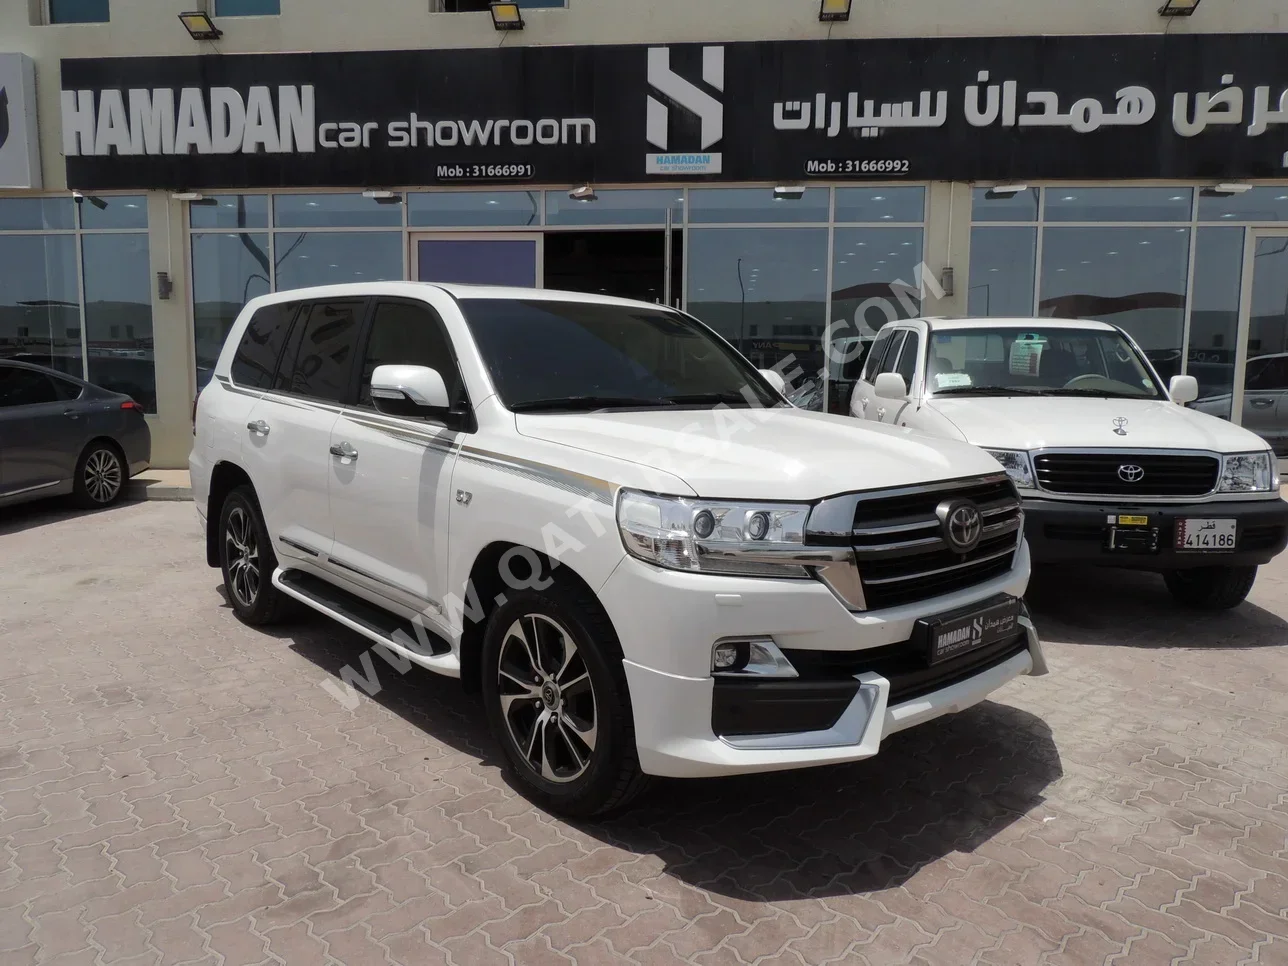 Toyota  Land Cruiser  VXR- Grand Touring S  2020  Automatic  216,000 Km  8 Cylinder  Four Wheel Drive (4WD)  SUV  White